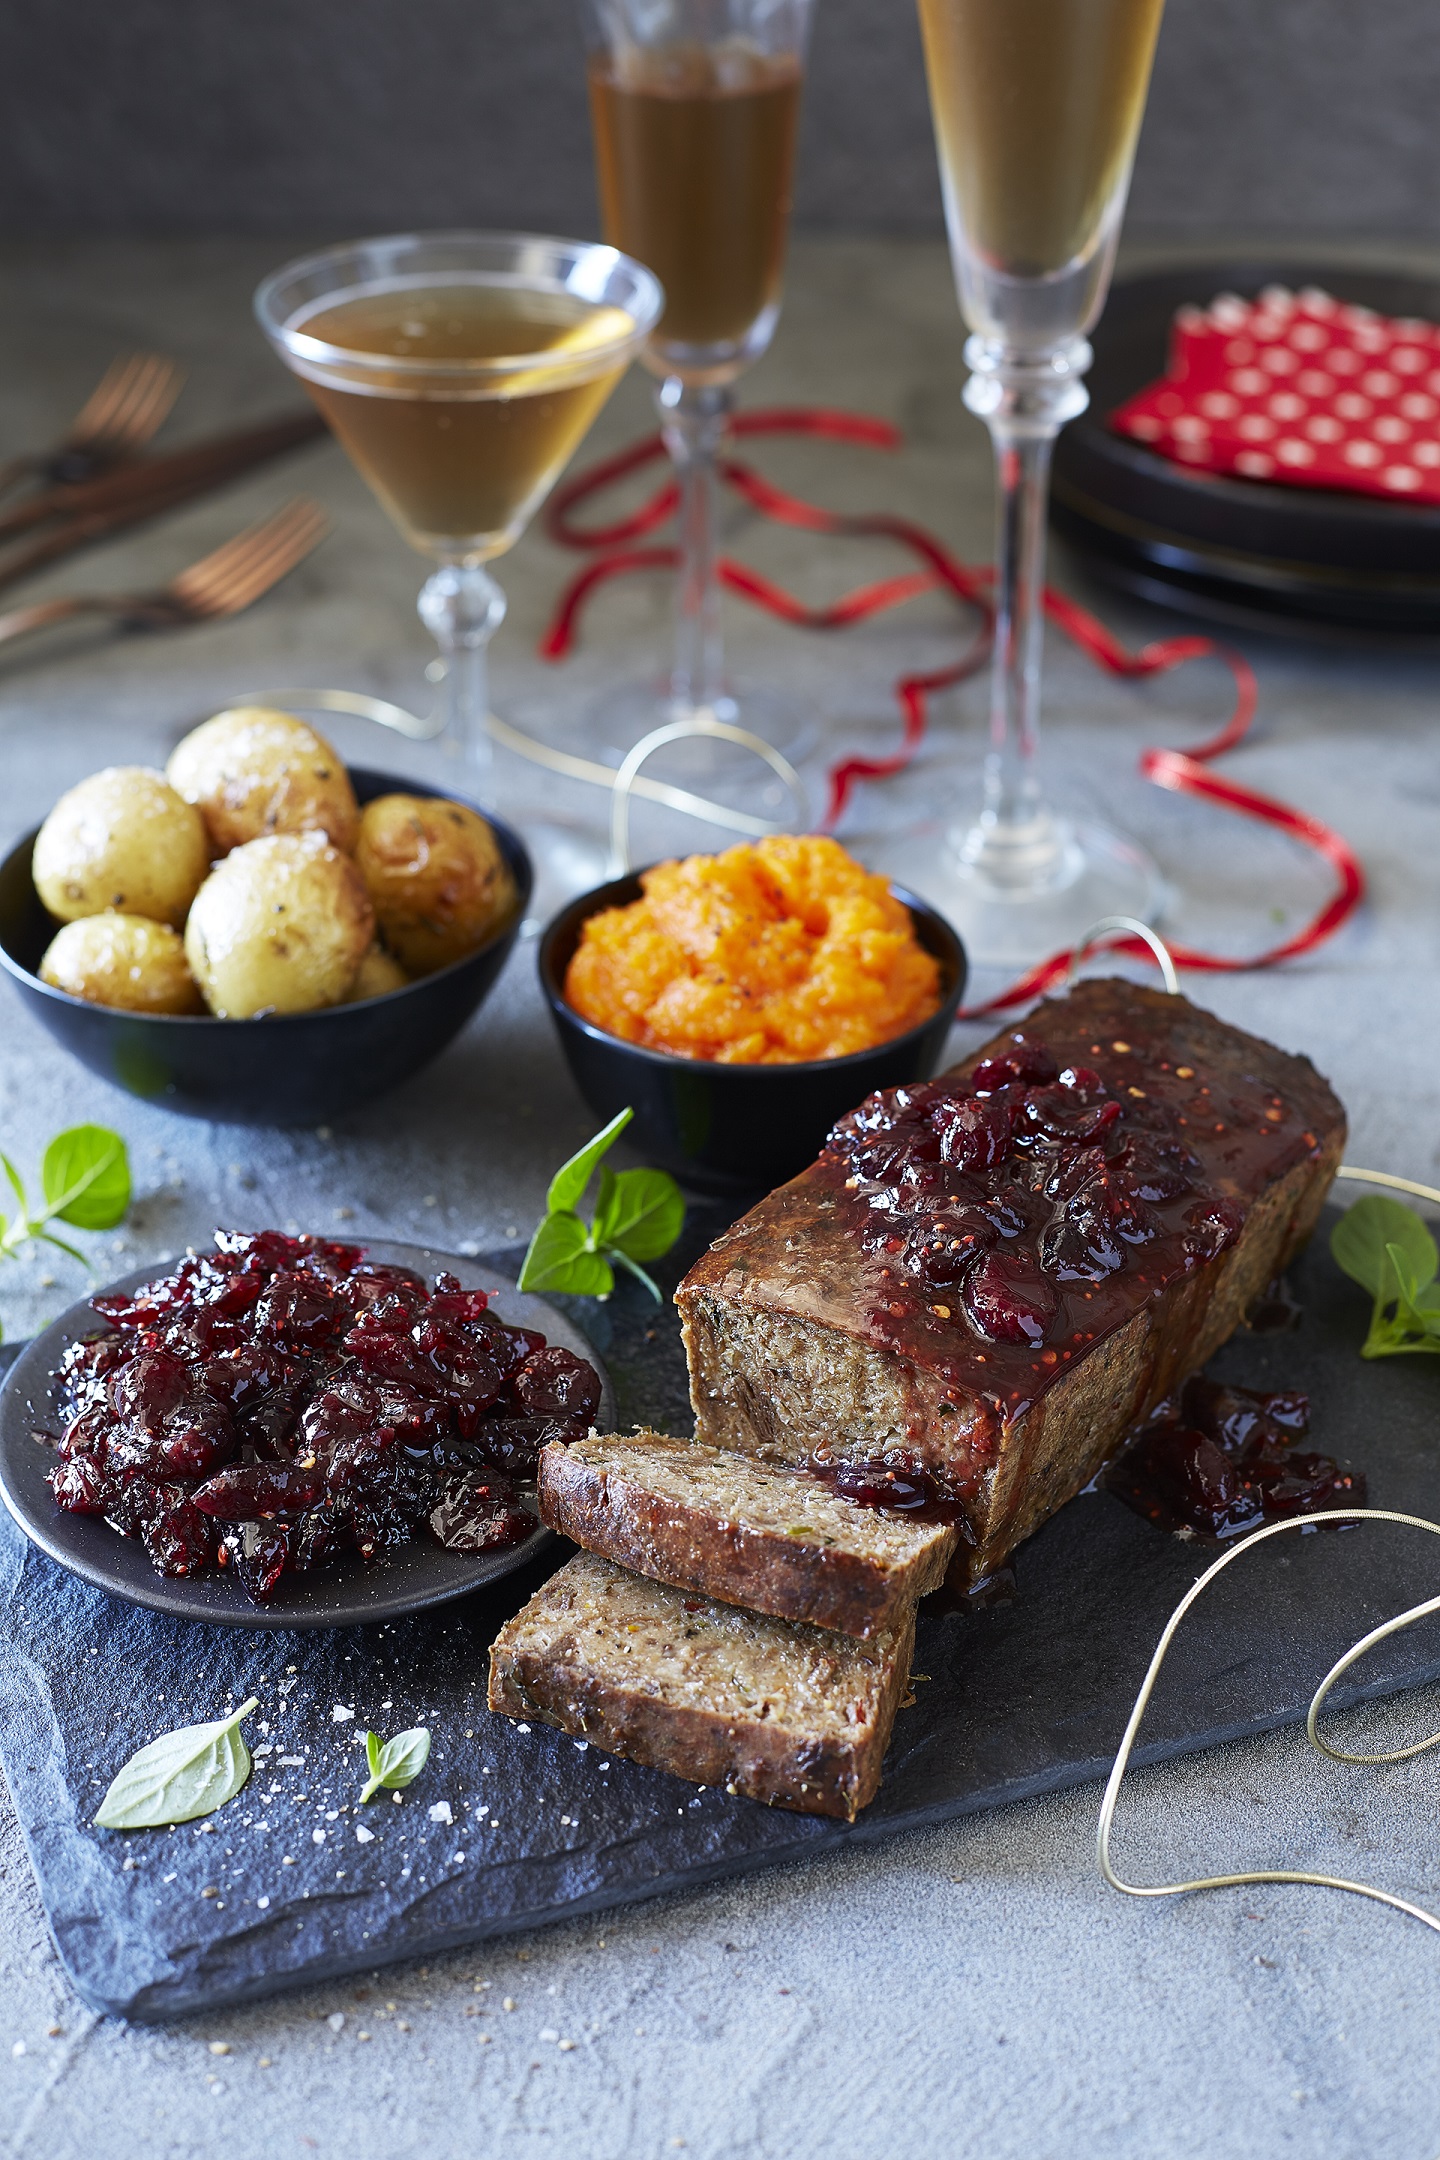 Fry’s Country Roast with Cranberry and Chili Jam